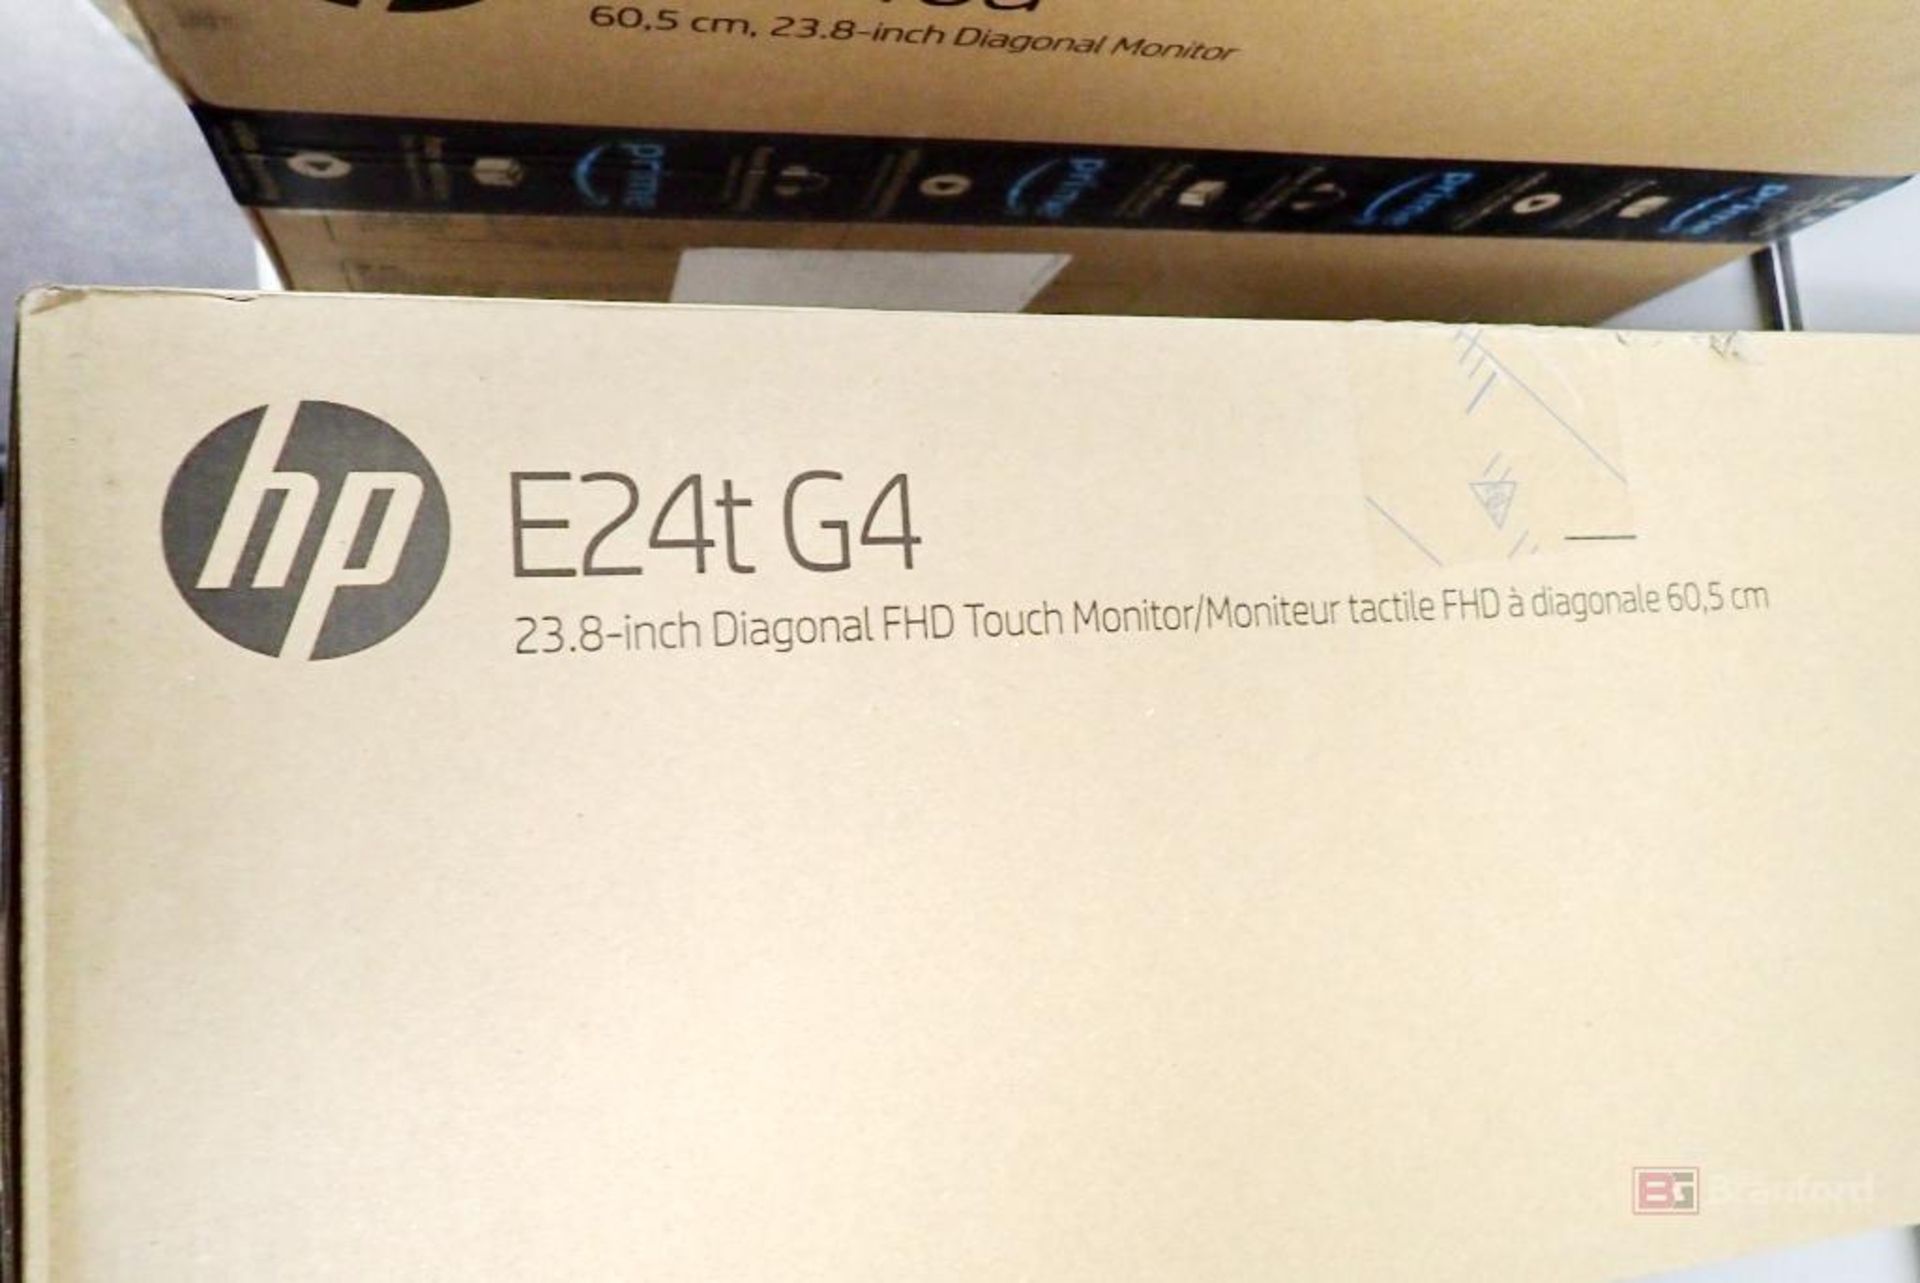 HP E24TG4 Diagonal FHD Touch Monitor - Image 2 of 2